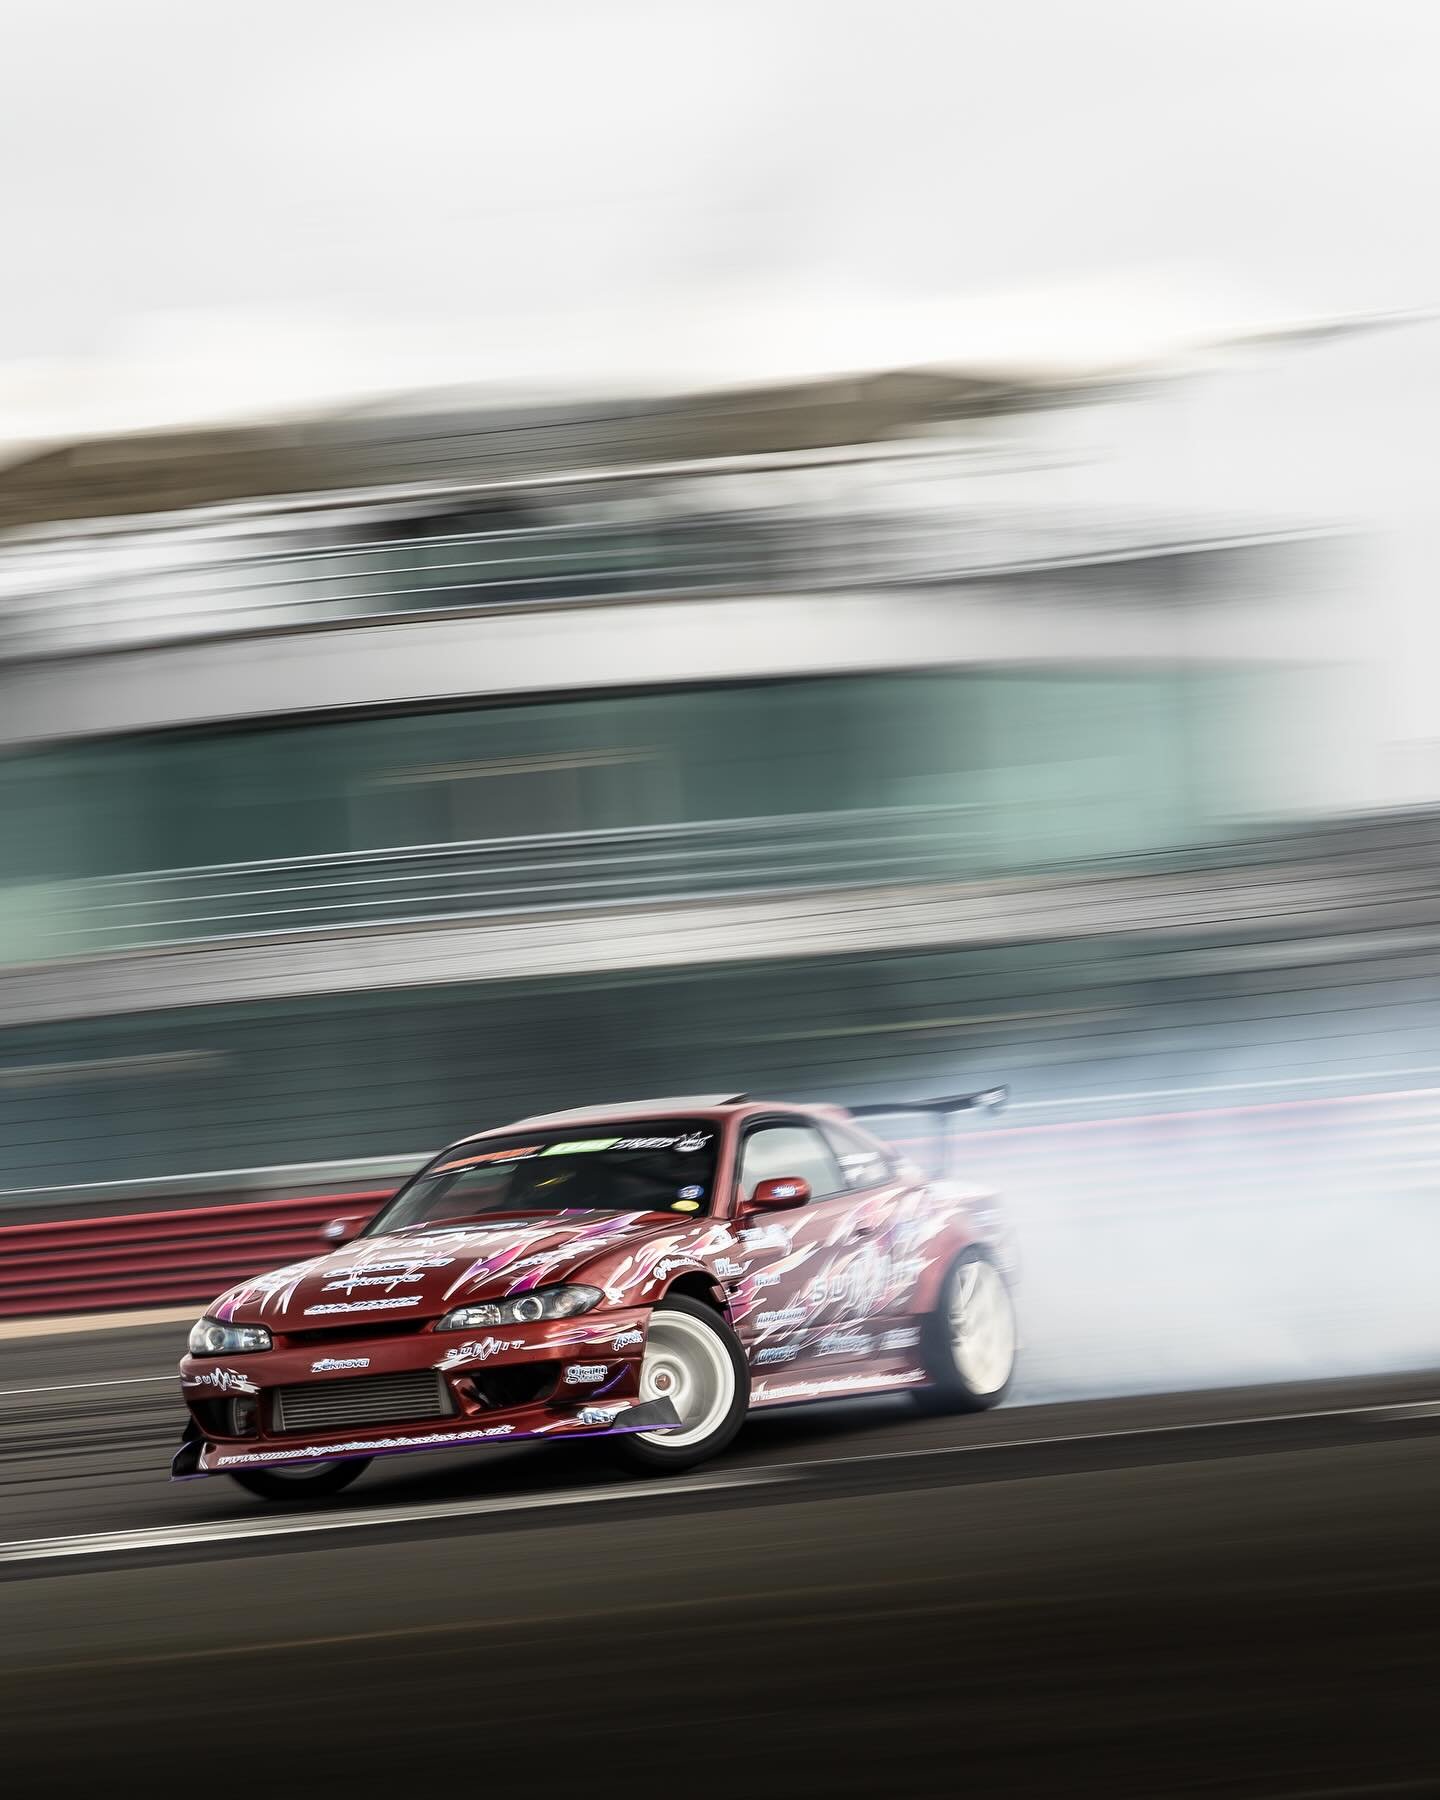 Can&rsquo;t get enough of this livery, it is great to see such good looking cars in the UK. 

@adamms15 
@japfest_official 

#drift #silvias15 #silvianation #silvia #nissans15 #s15 #s15silvia #nissan #drifting